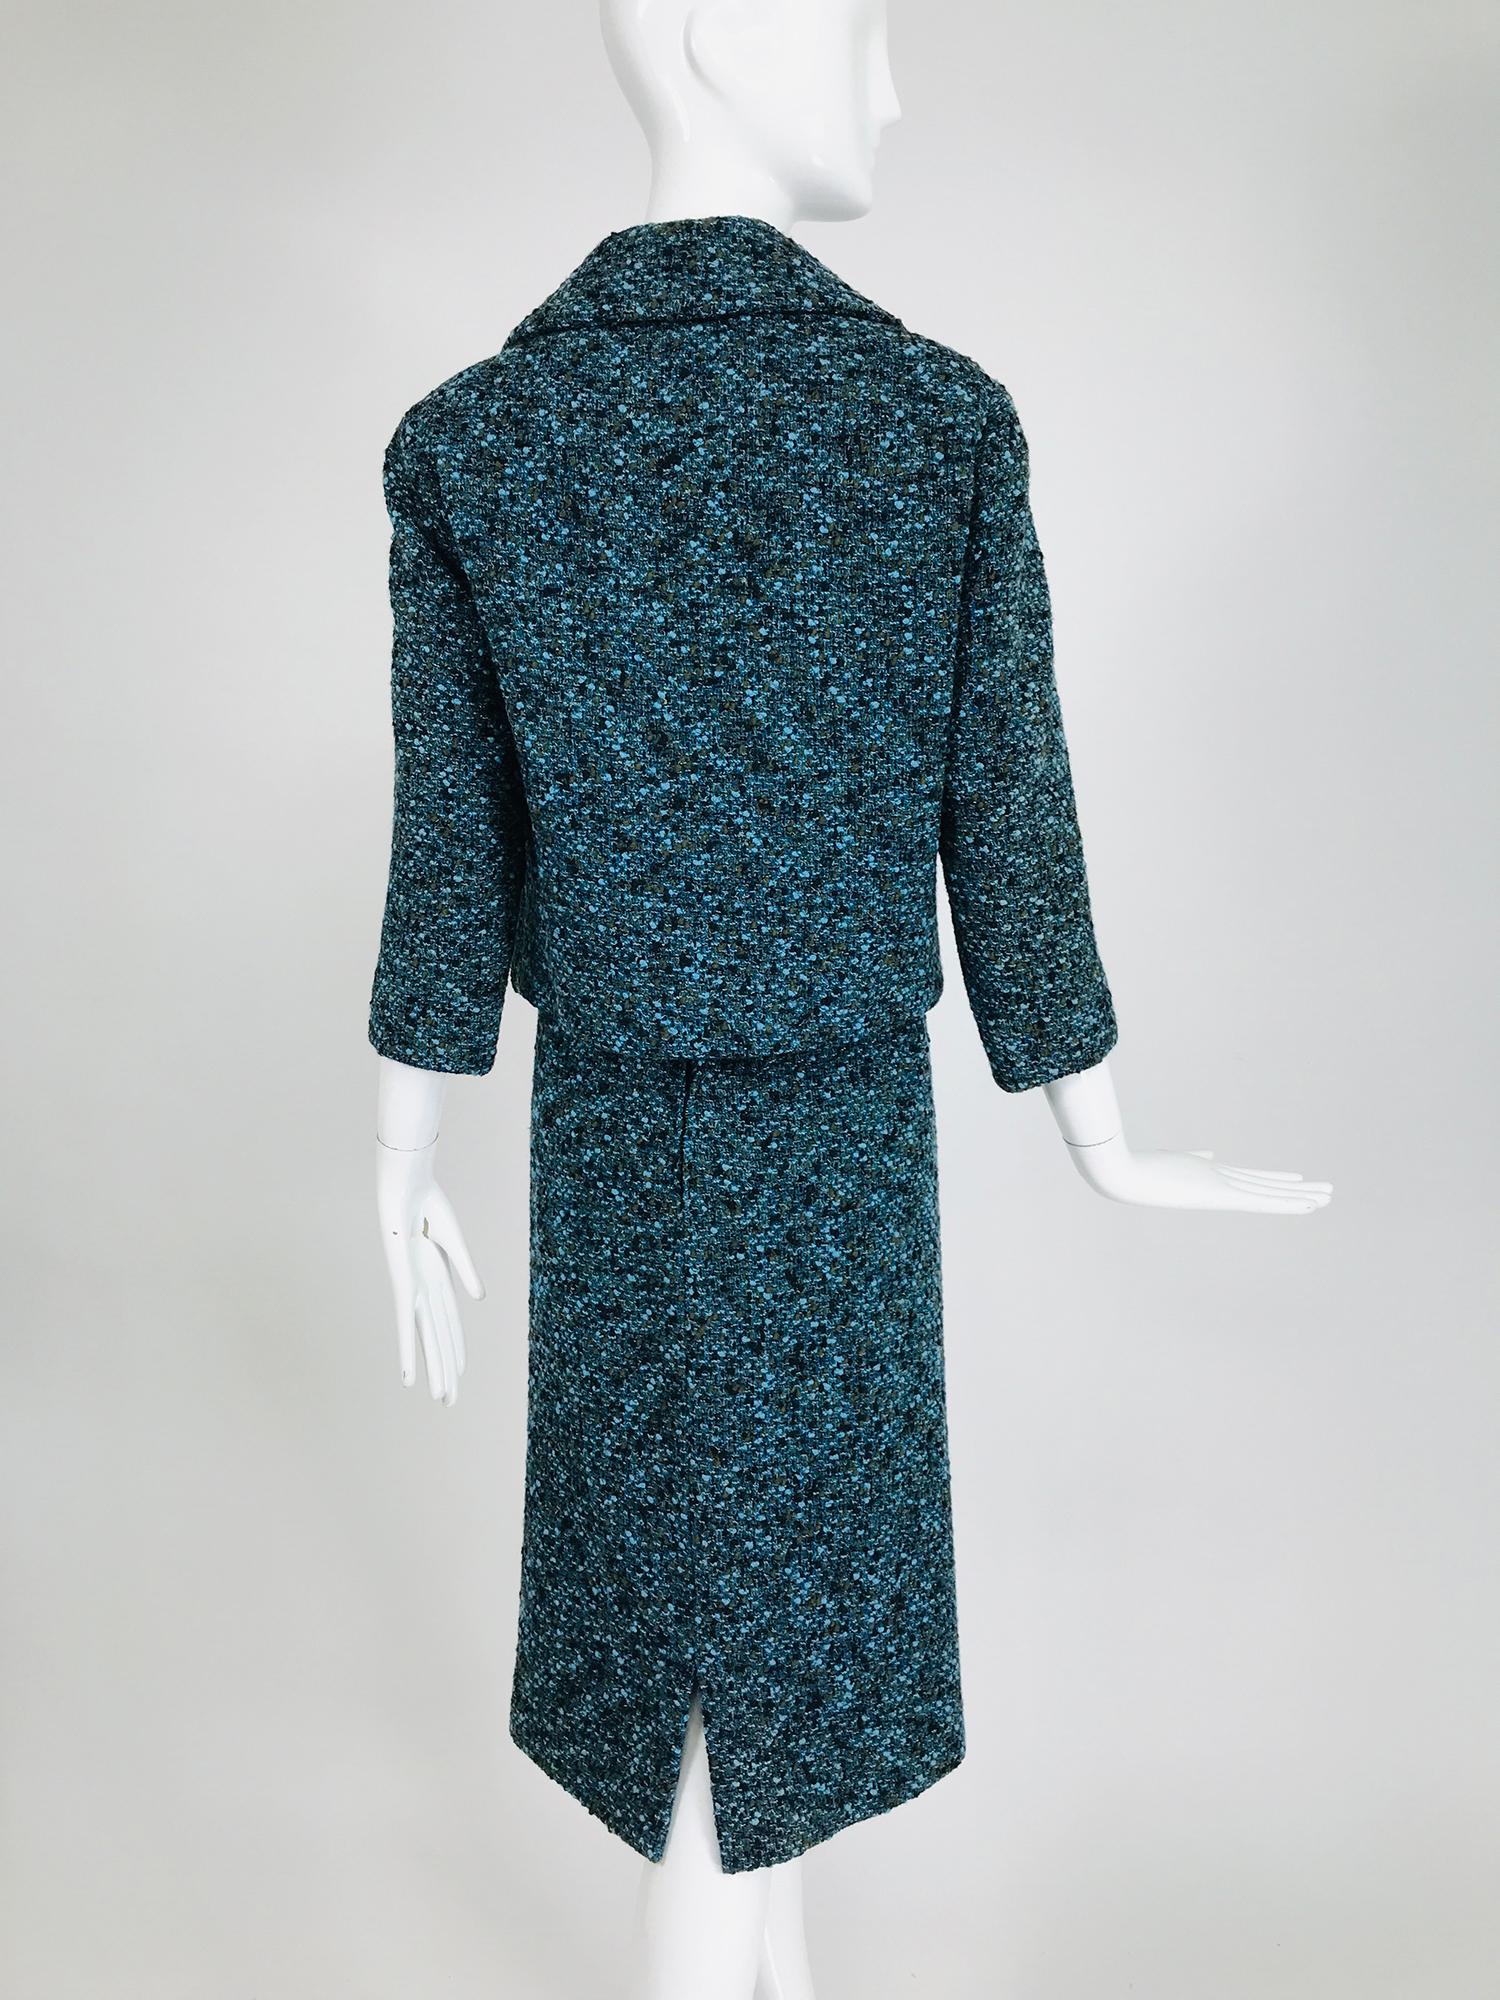 Jeanne Lanvin Numbered Couture Early 1960s Blue Tweed Skirt Suit  For Sale 1